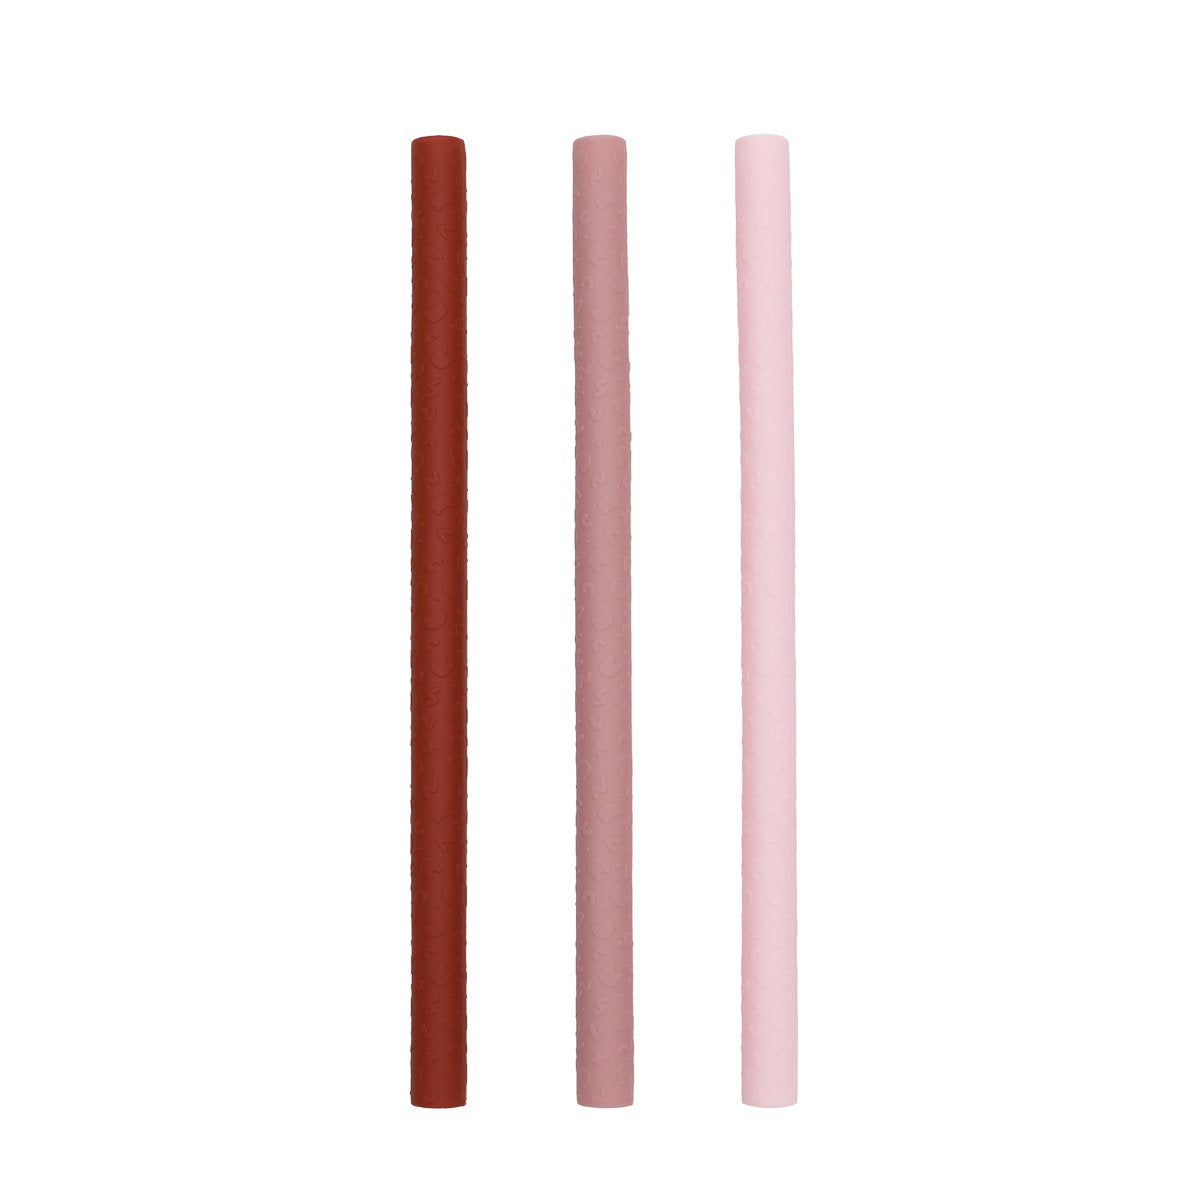 Reusable Silicone Straws - Pack of 6 (Rose Mix) - albie – albie co.